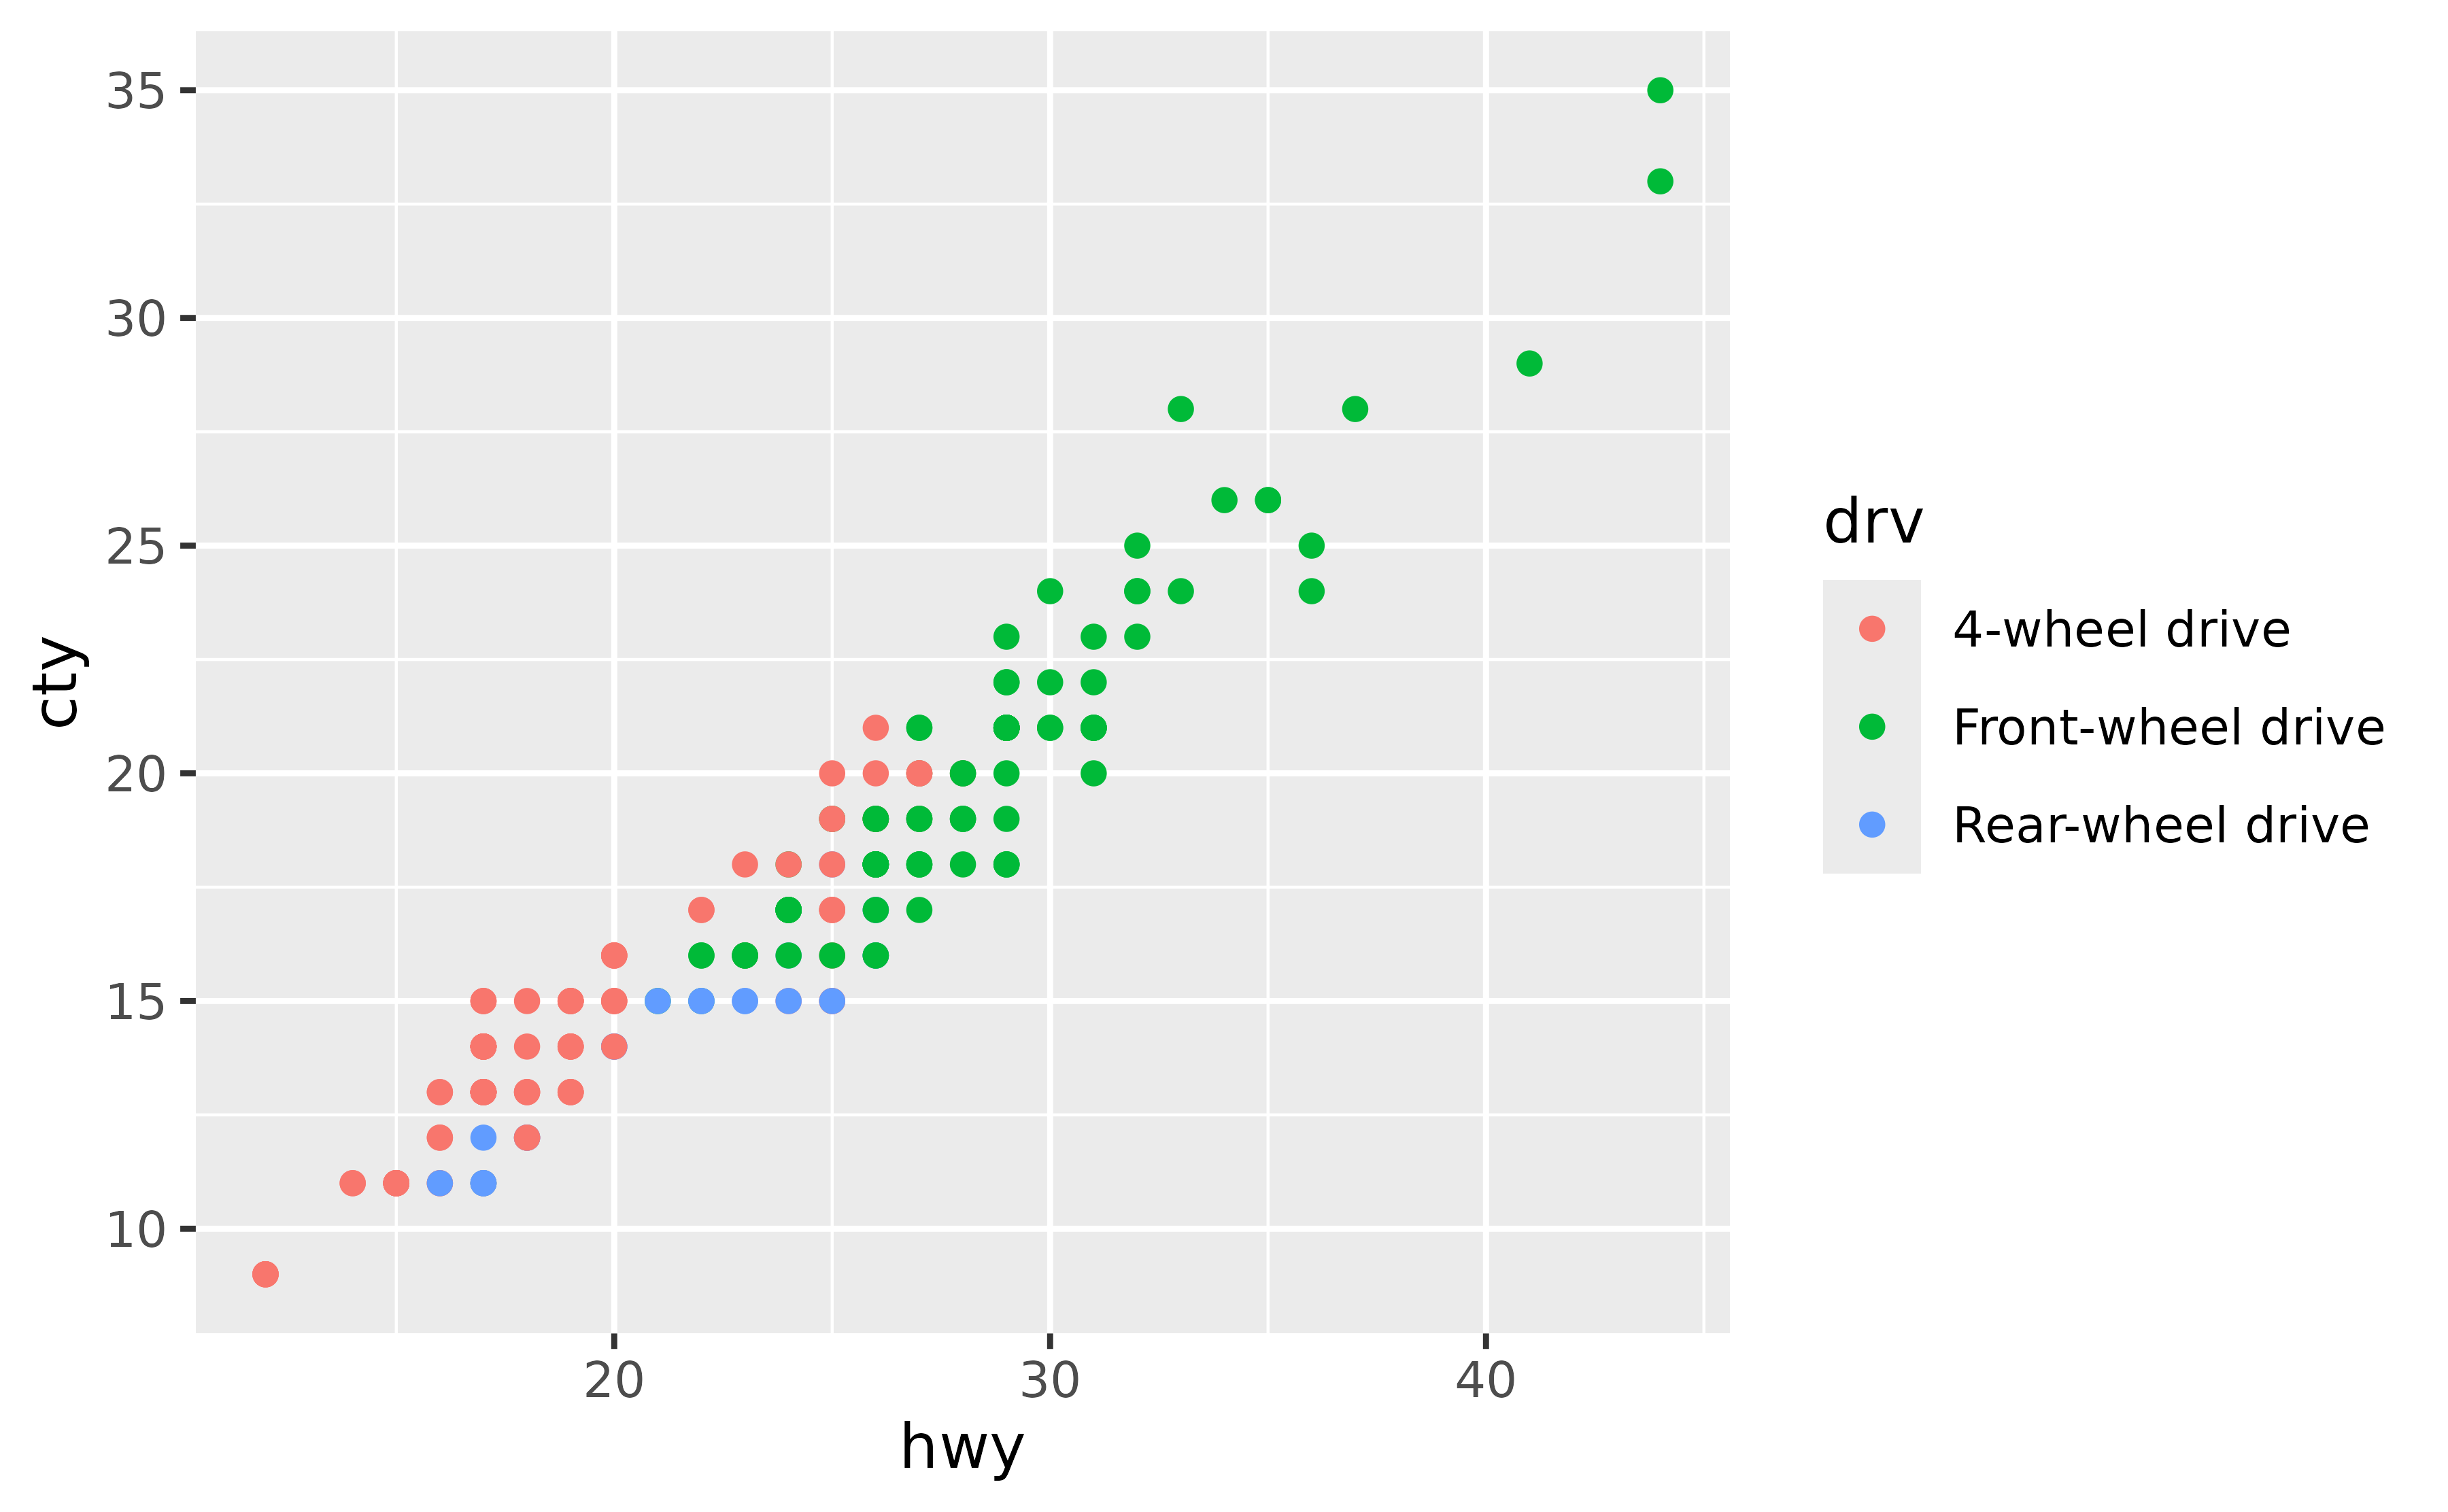 A scatter plot showing the highway miles per gallon on the x-axis and city miles per gallon on the y-axis. The points are coloured by three types of drive train, which is displayed in a legend at the right of the plot. The legend items are name '4-wheel drive', 'Front-wheel drive' and 'Rear-wheel drive' from top to bottom.